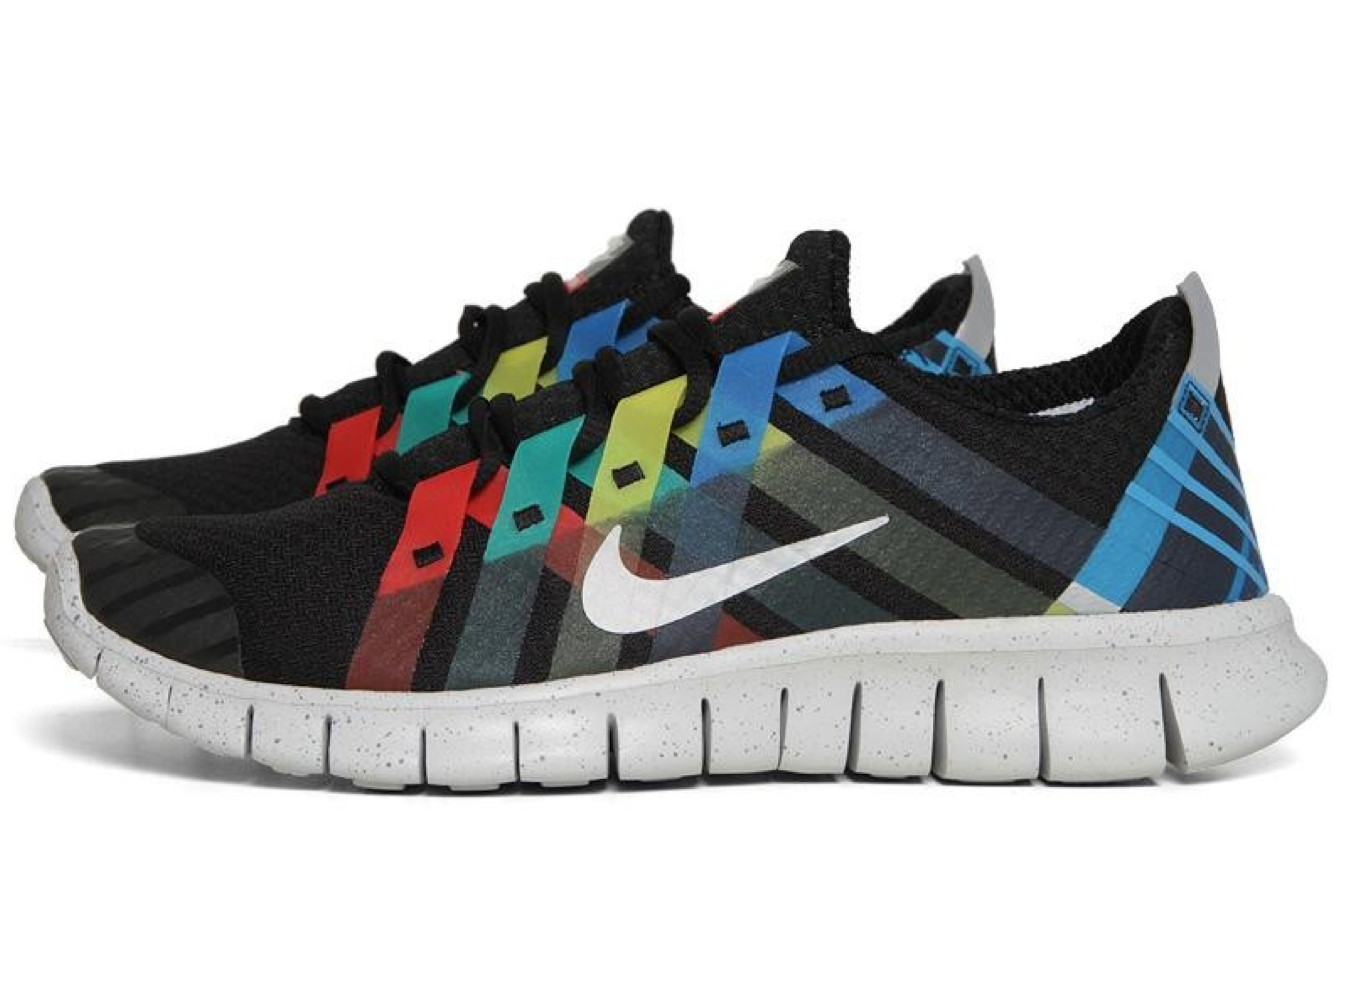 Nike Free Powerlines+ NRG ‘Olympics’ at End